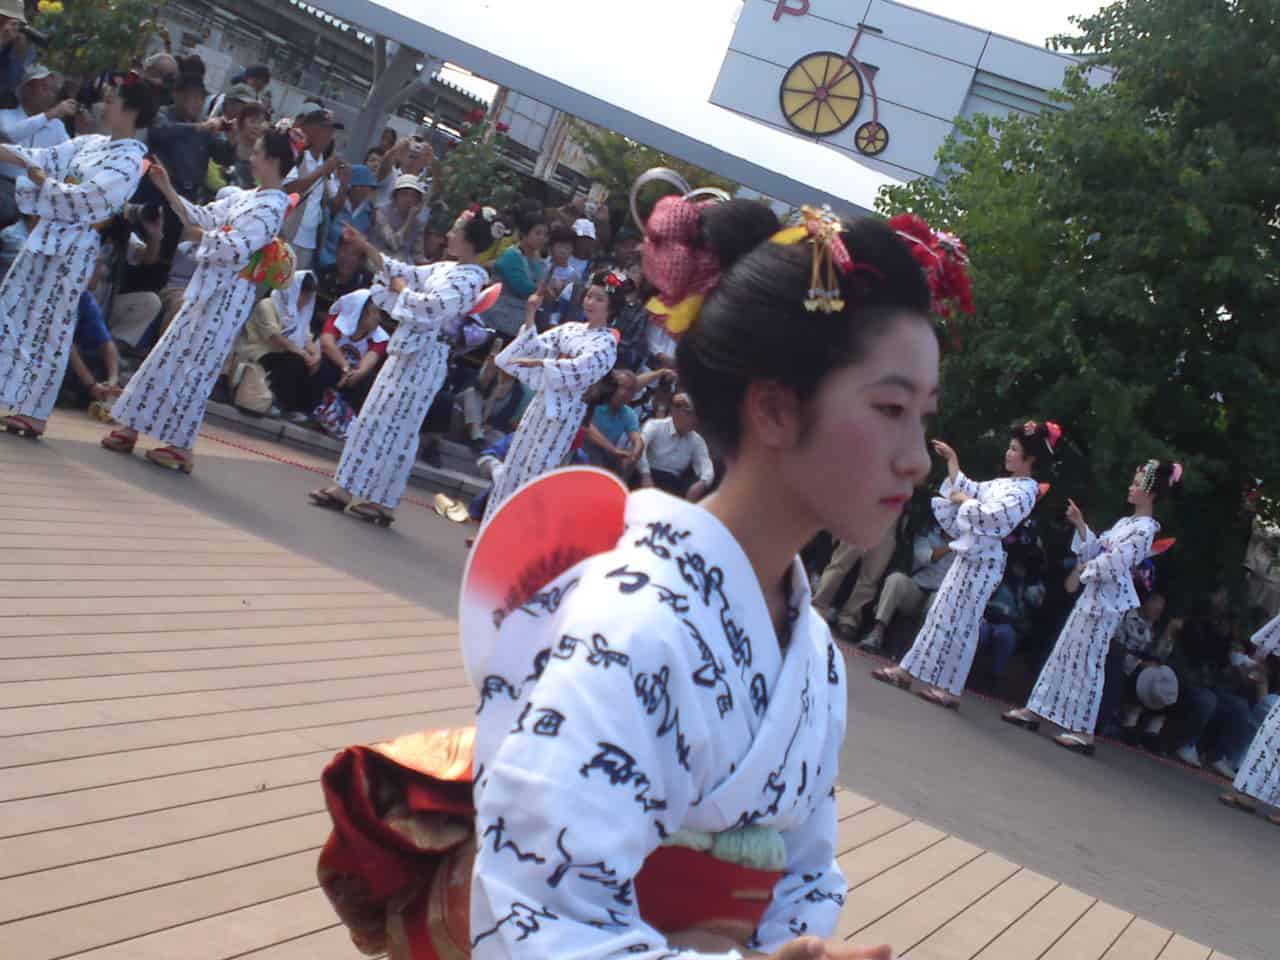 Shimada,hair,festival,hairstyle,style,knot,Japan,tourism